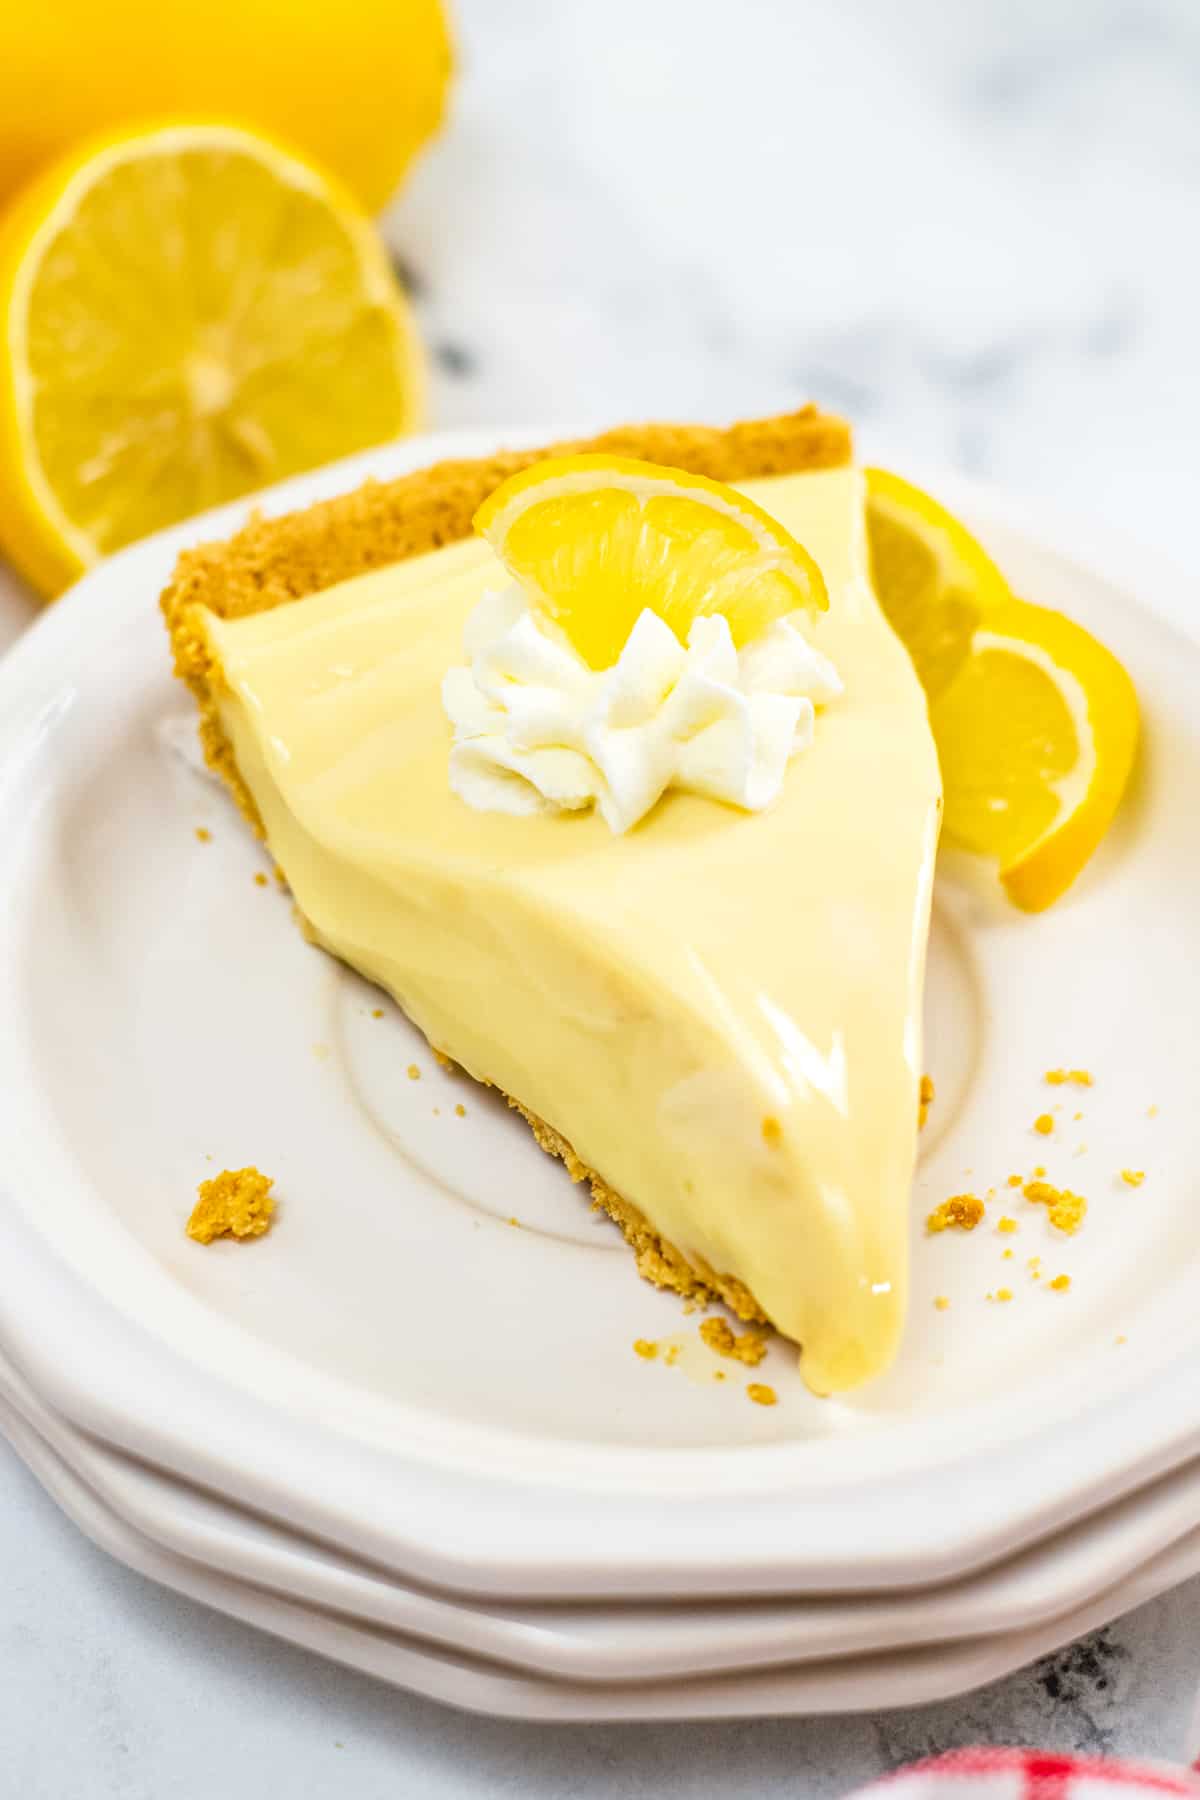 Piece of no bake lemon pie with graham cracker crust and topped with lemon slice and whipped cream